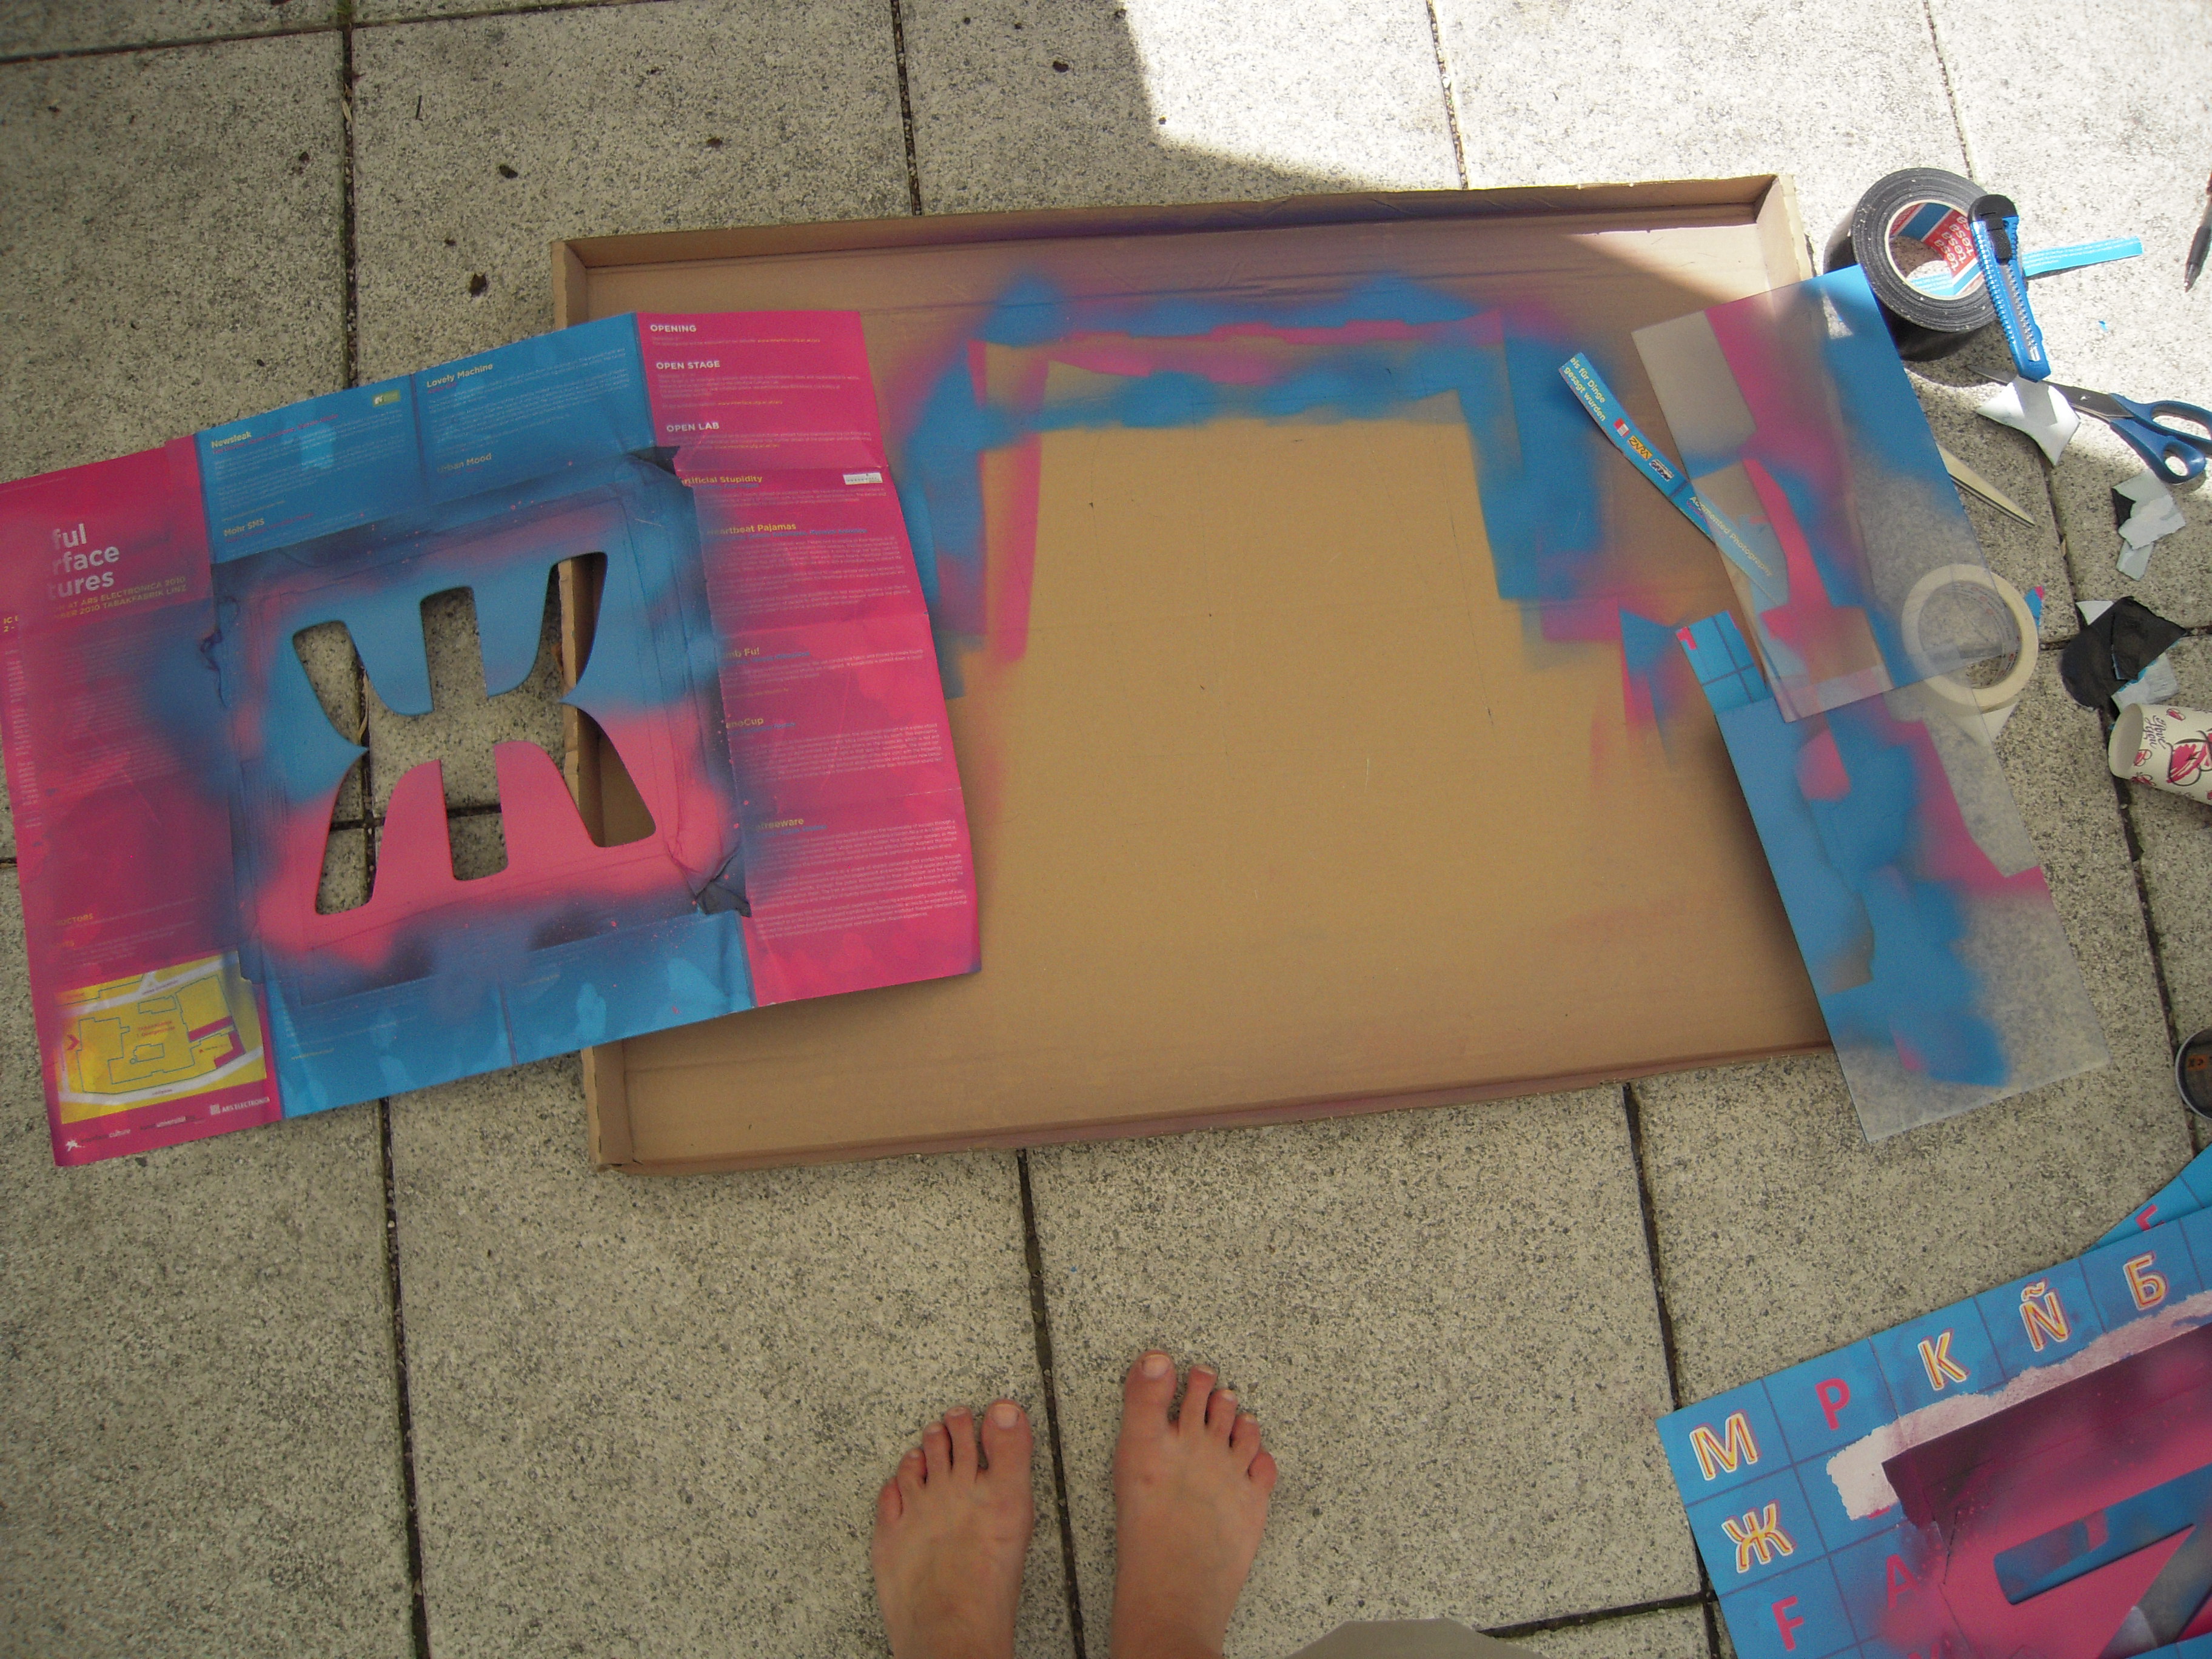 Spraypainting the boxes with stencils